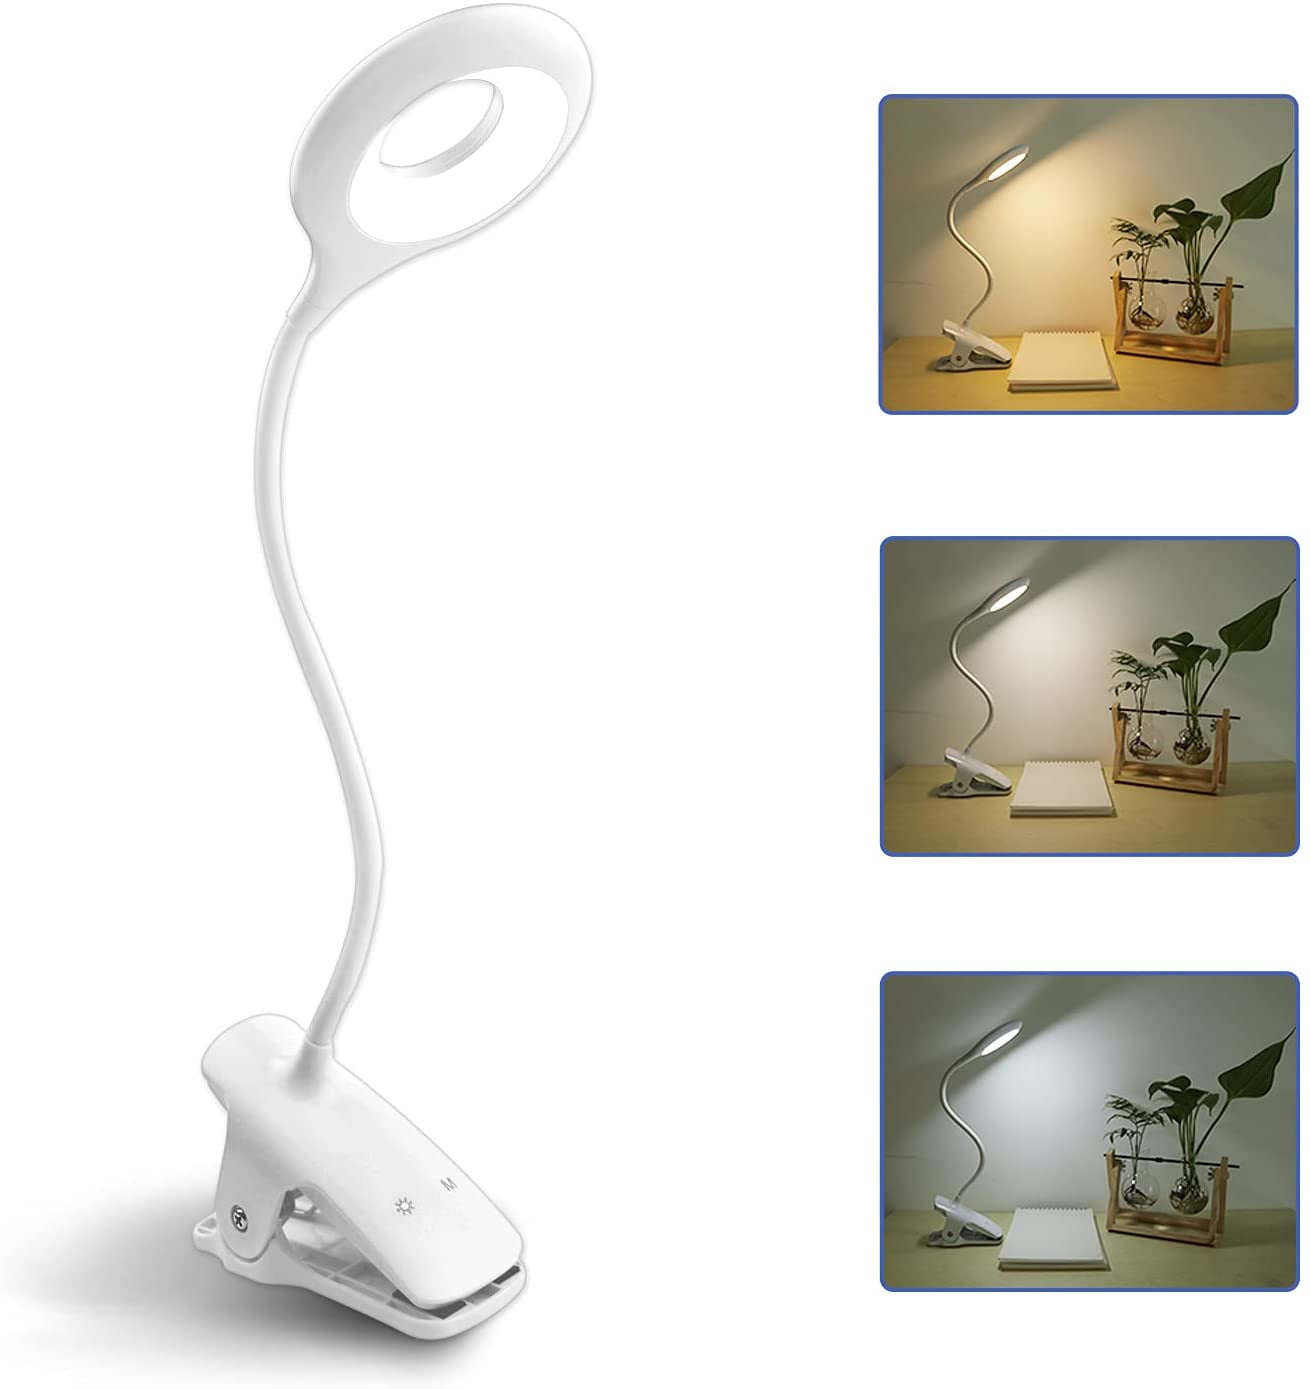 Touch Switch Bedside Book Light with Good Eye Protection Brightness Led Clip Reading Light White Raniaco Daylight 12 LEDs Reading Lamp-3 Brightness,USB Rechargeable 